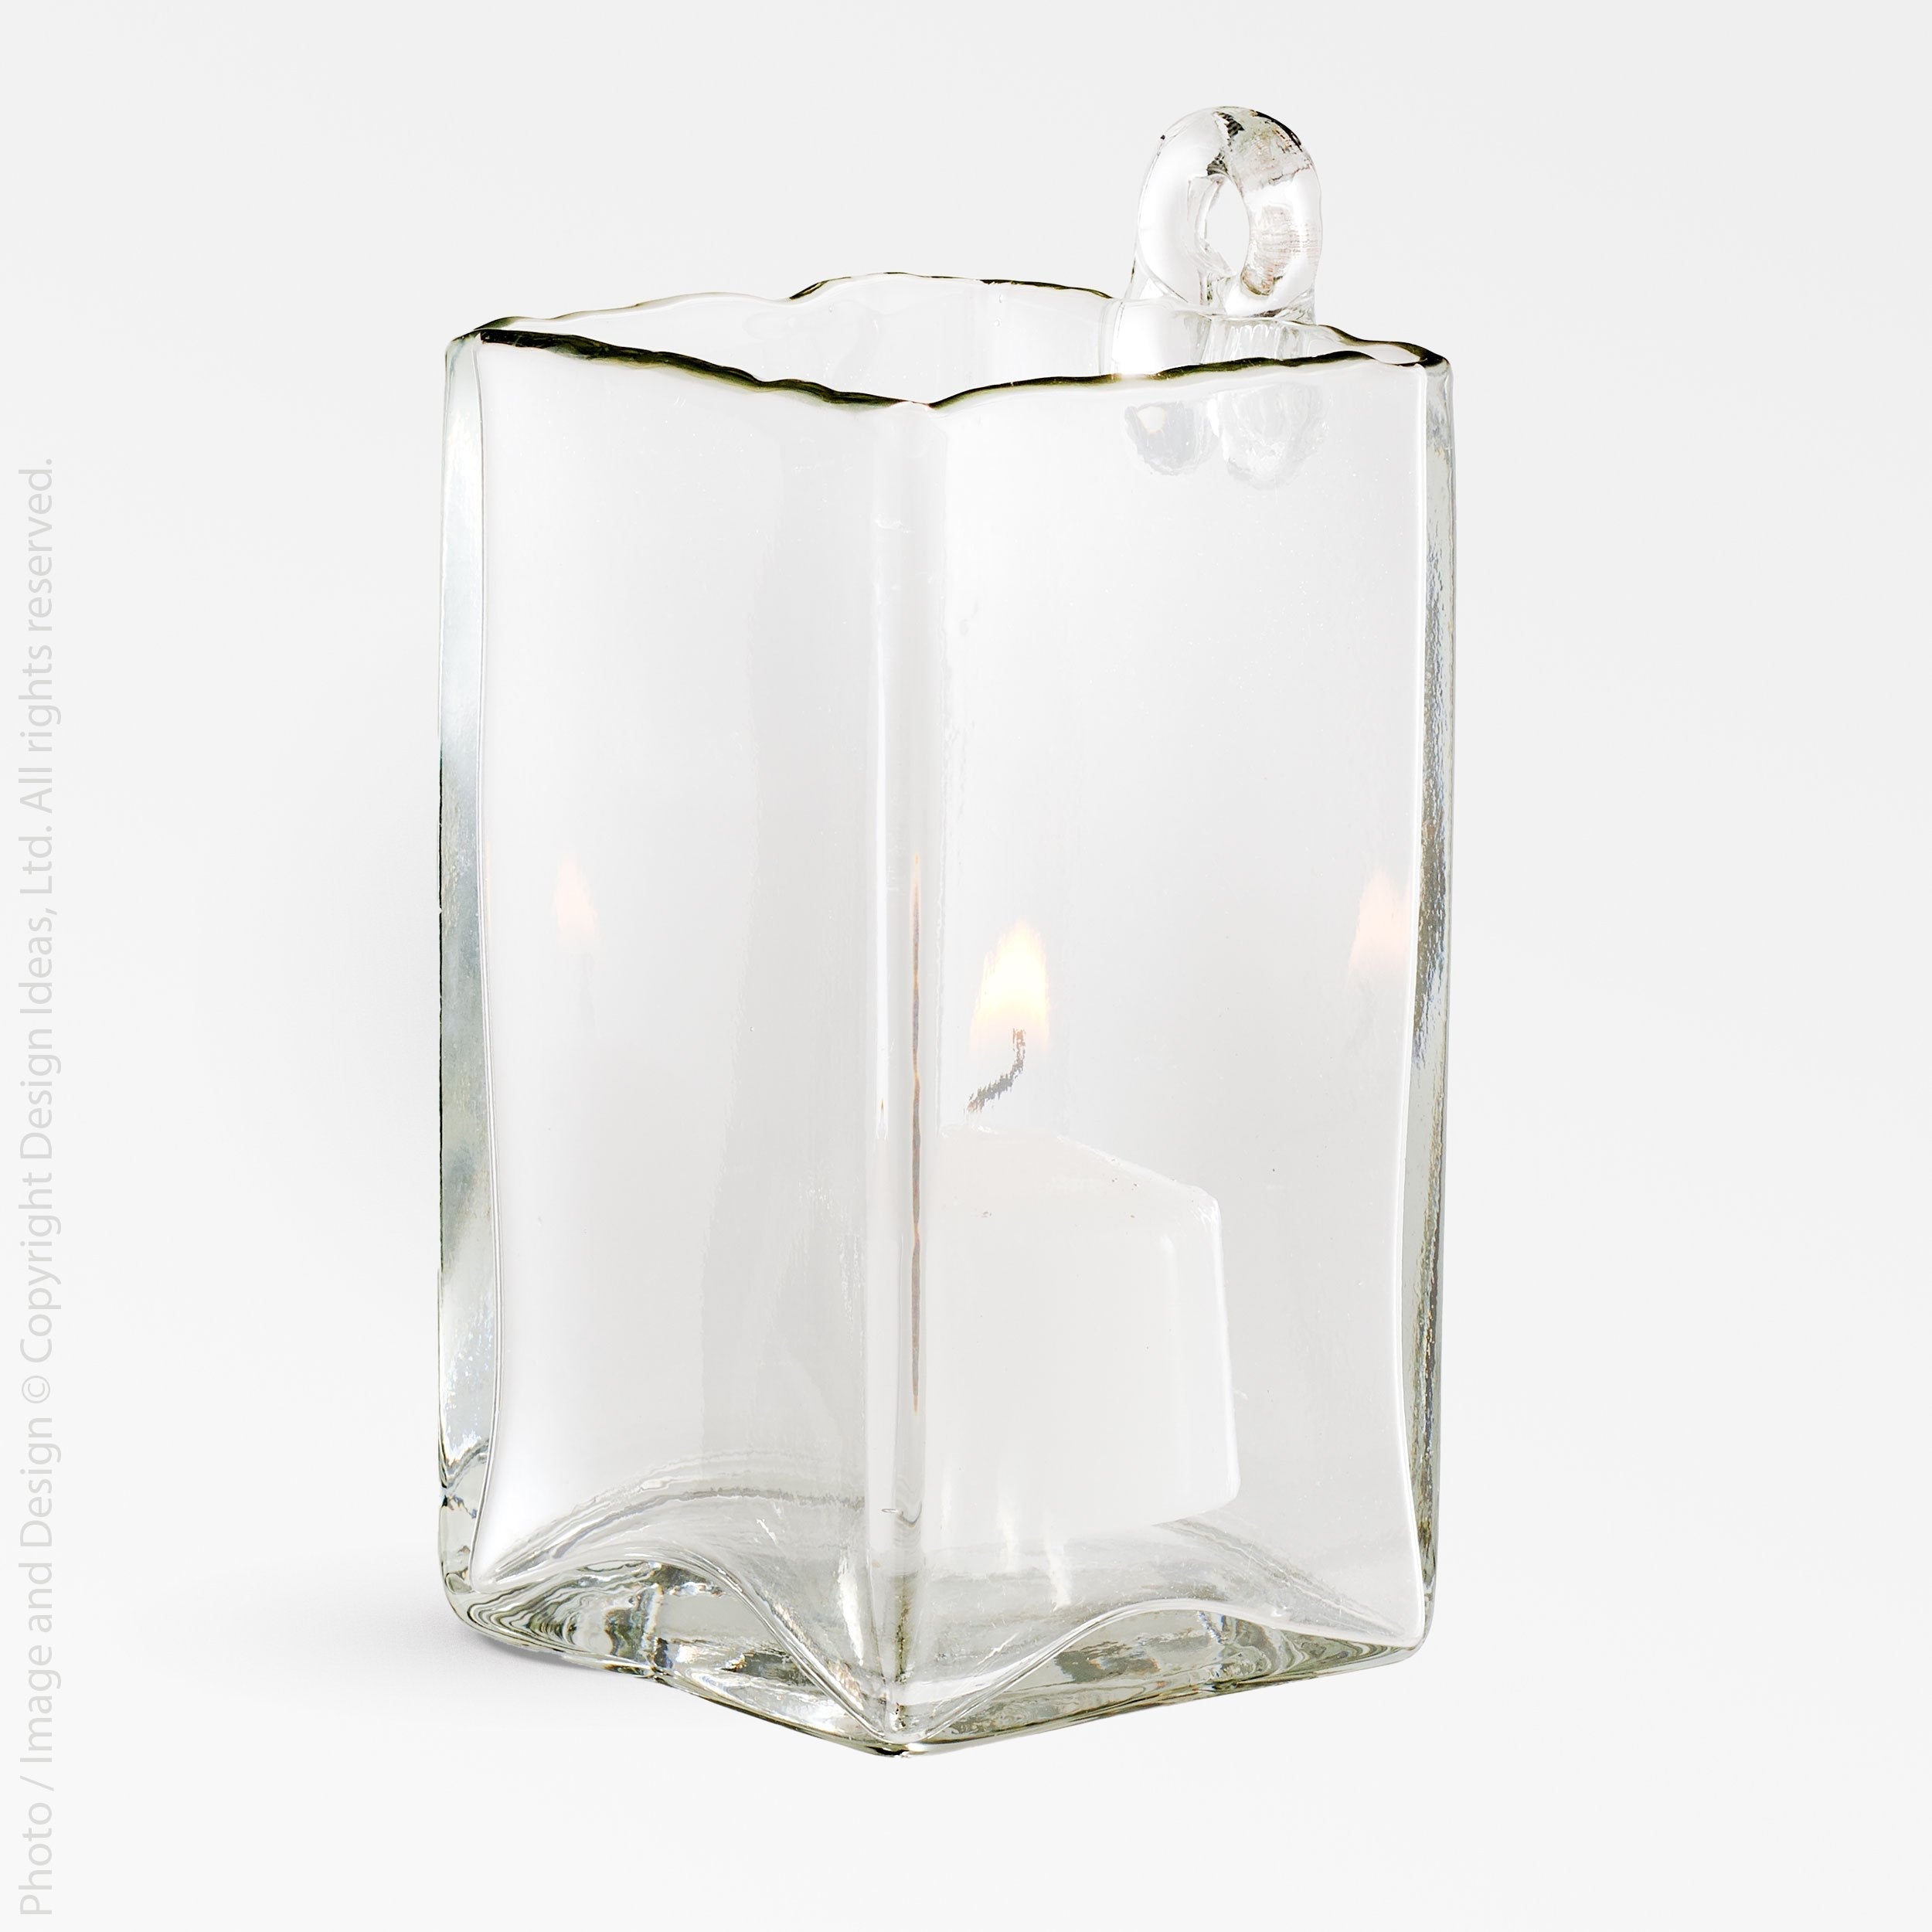 Bowery Glass Candle Holder (Medium) - white color | Image 1 | From the Bowery Collection | Masterfully made with natural glass for long lasting use | Available in clear color | texxture home